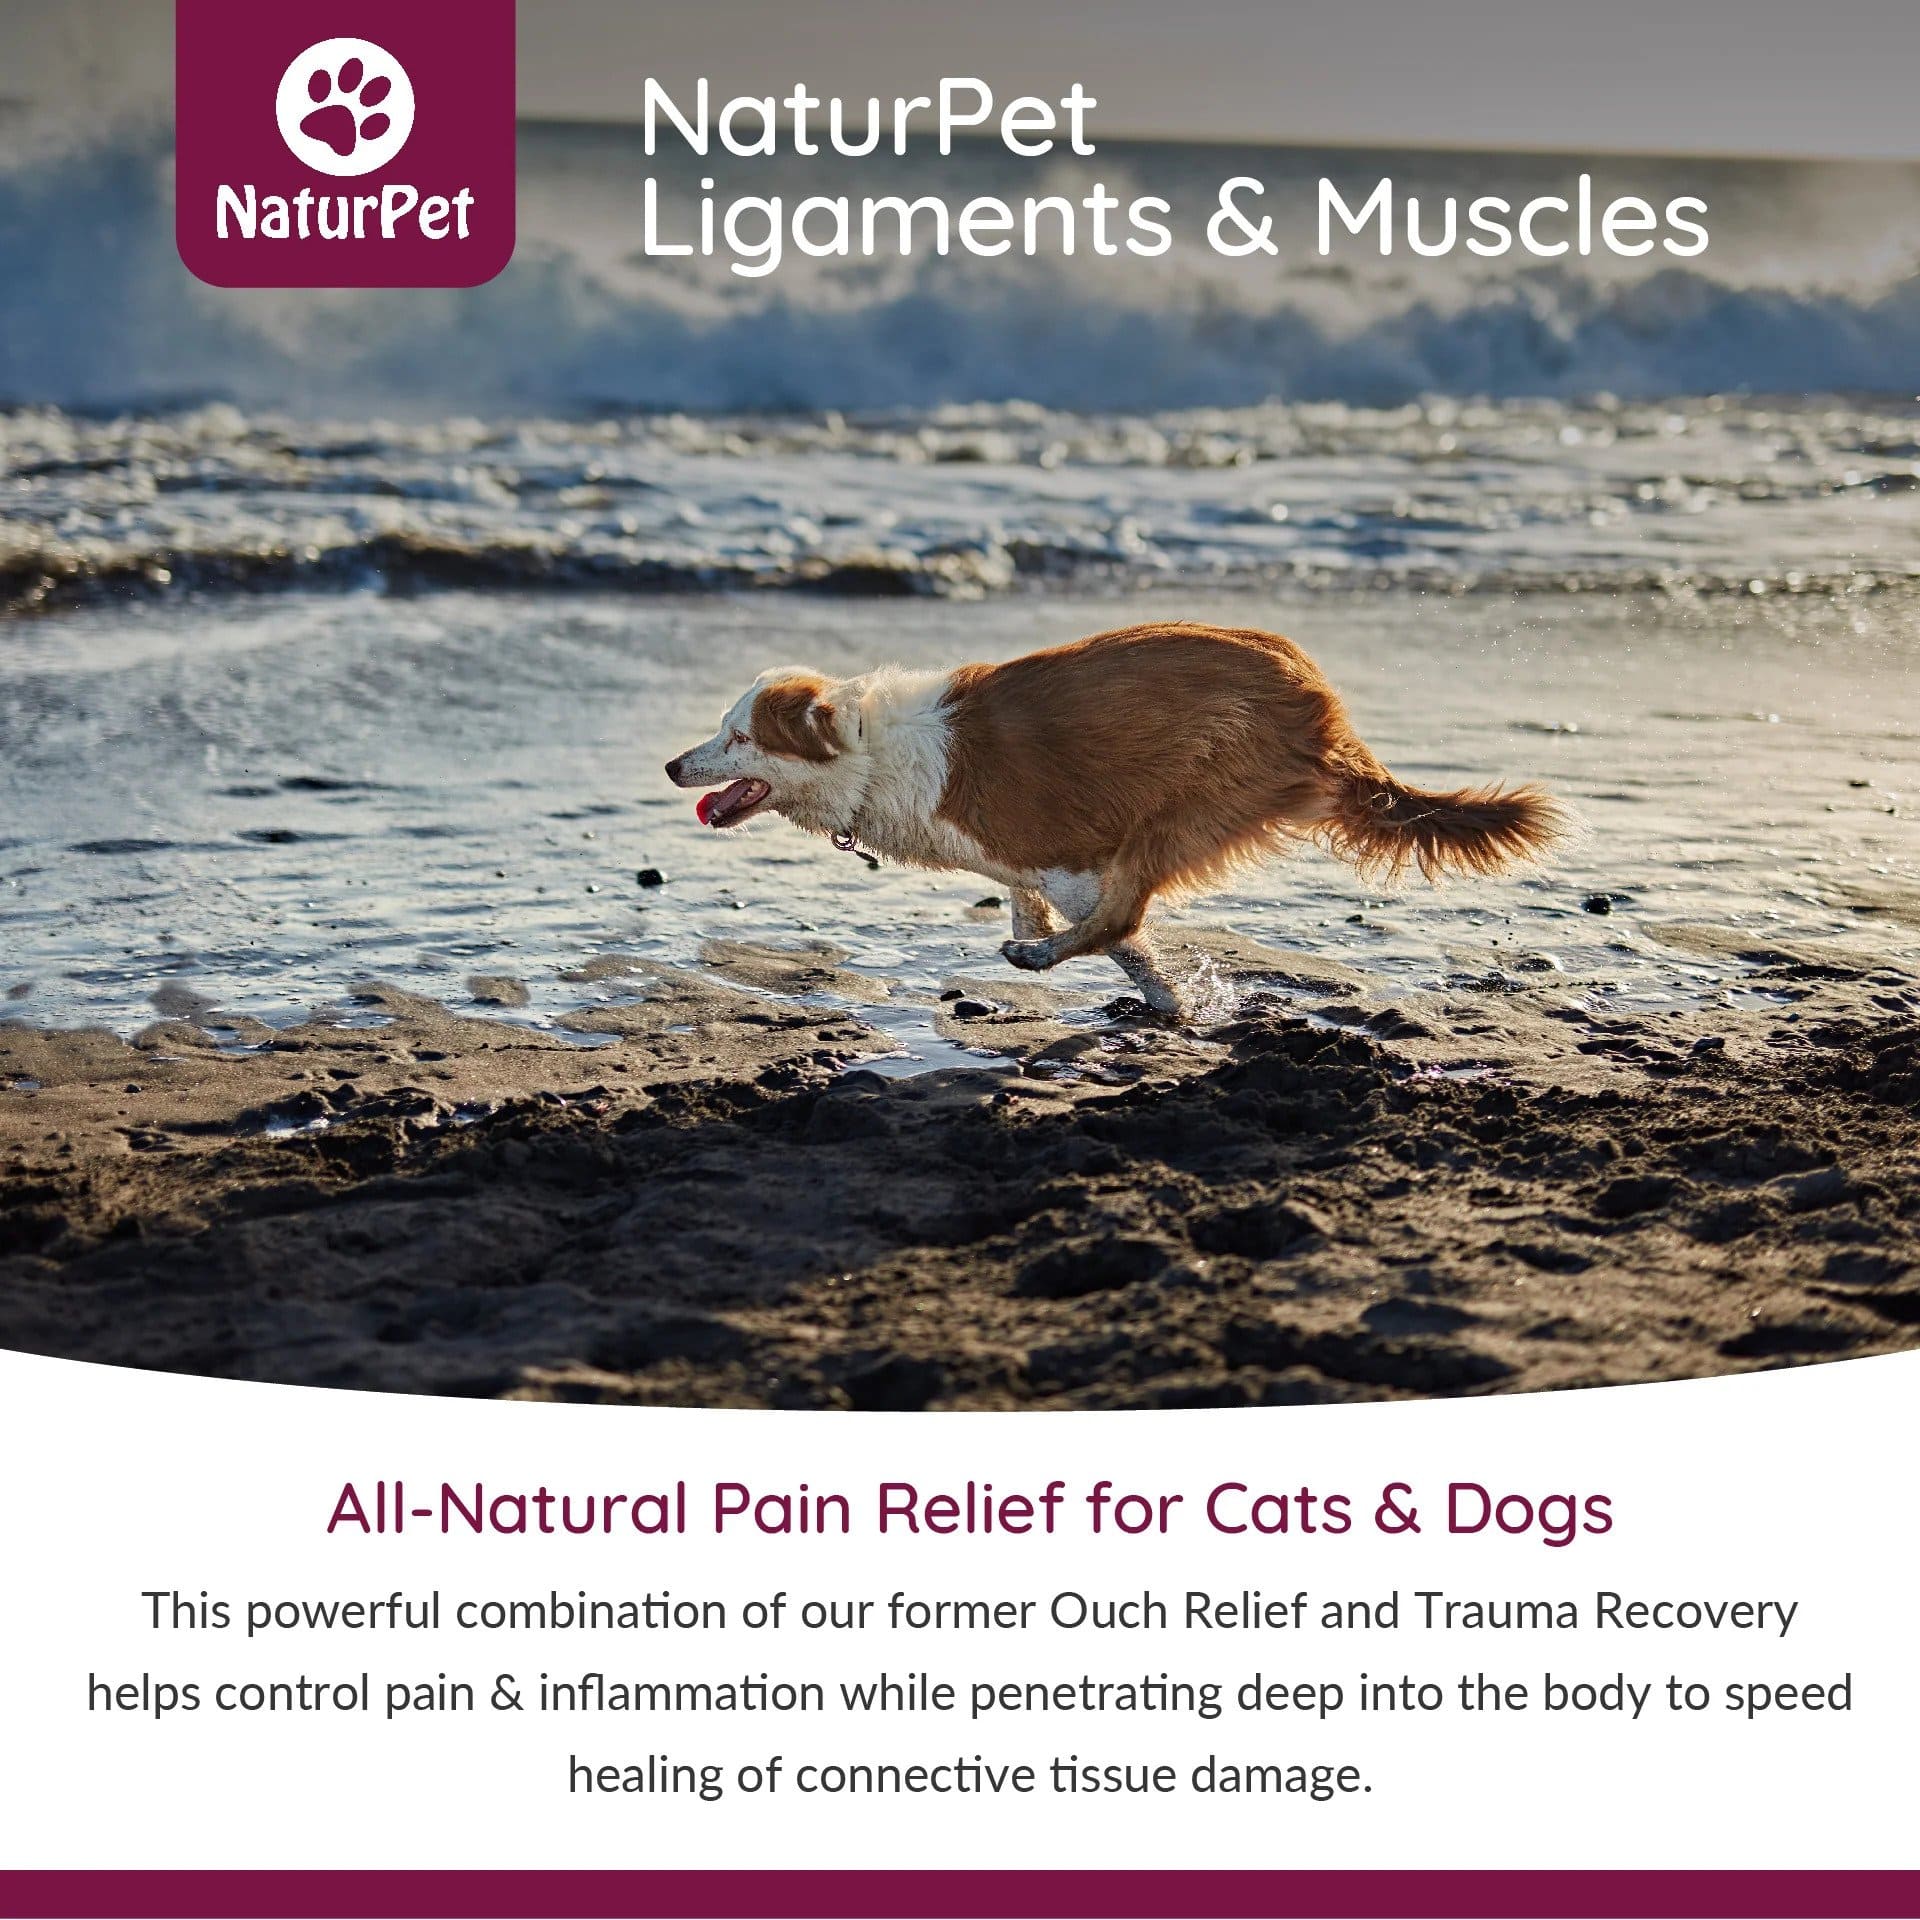 NaturPet Ligaments & Muscles - Soft Tissue Support How to use